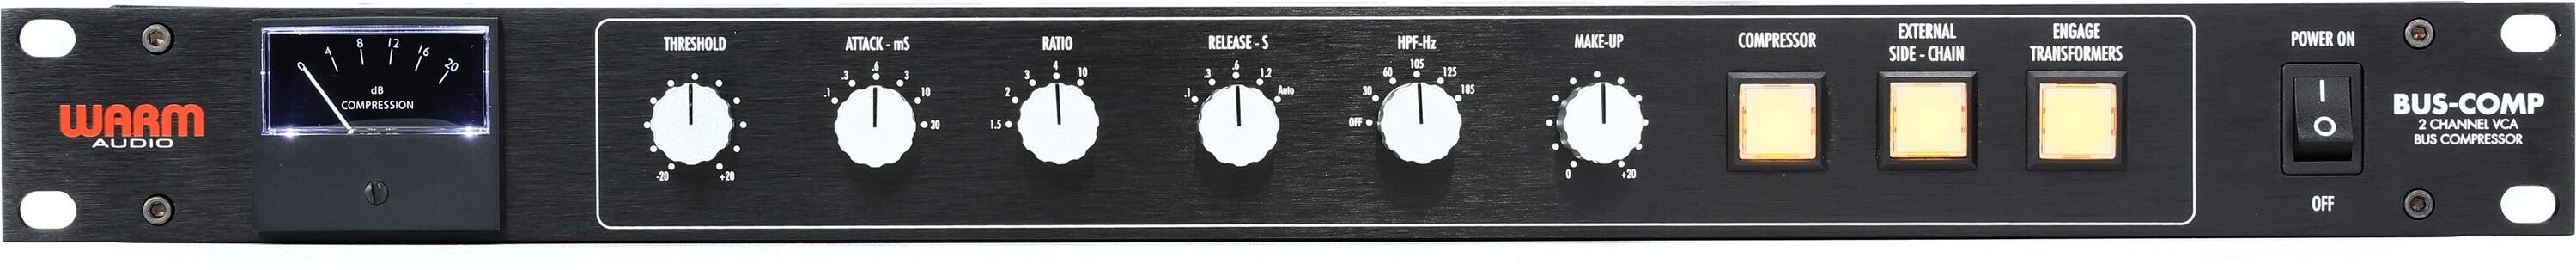 Warm Audio Bus-Comp 2-channel Stereo VCA Bus Compressor | Sweetwater